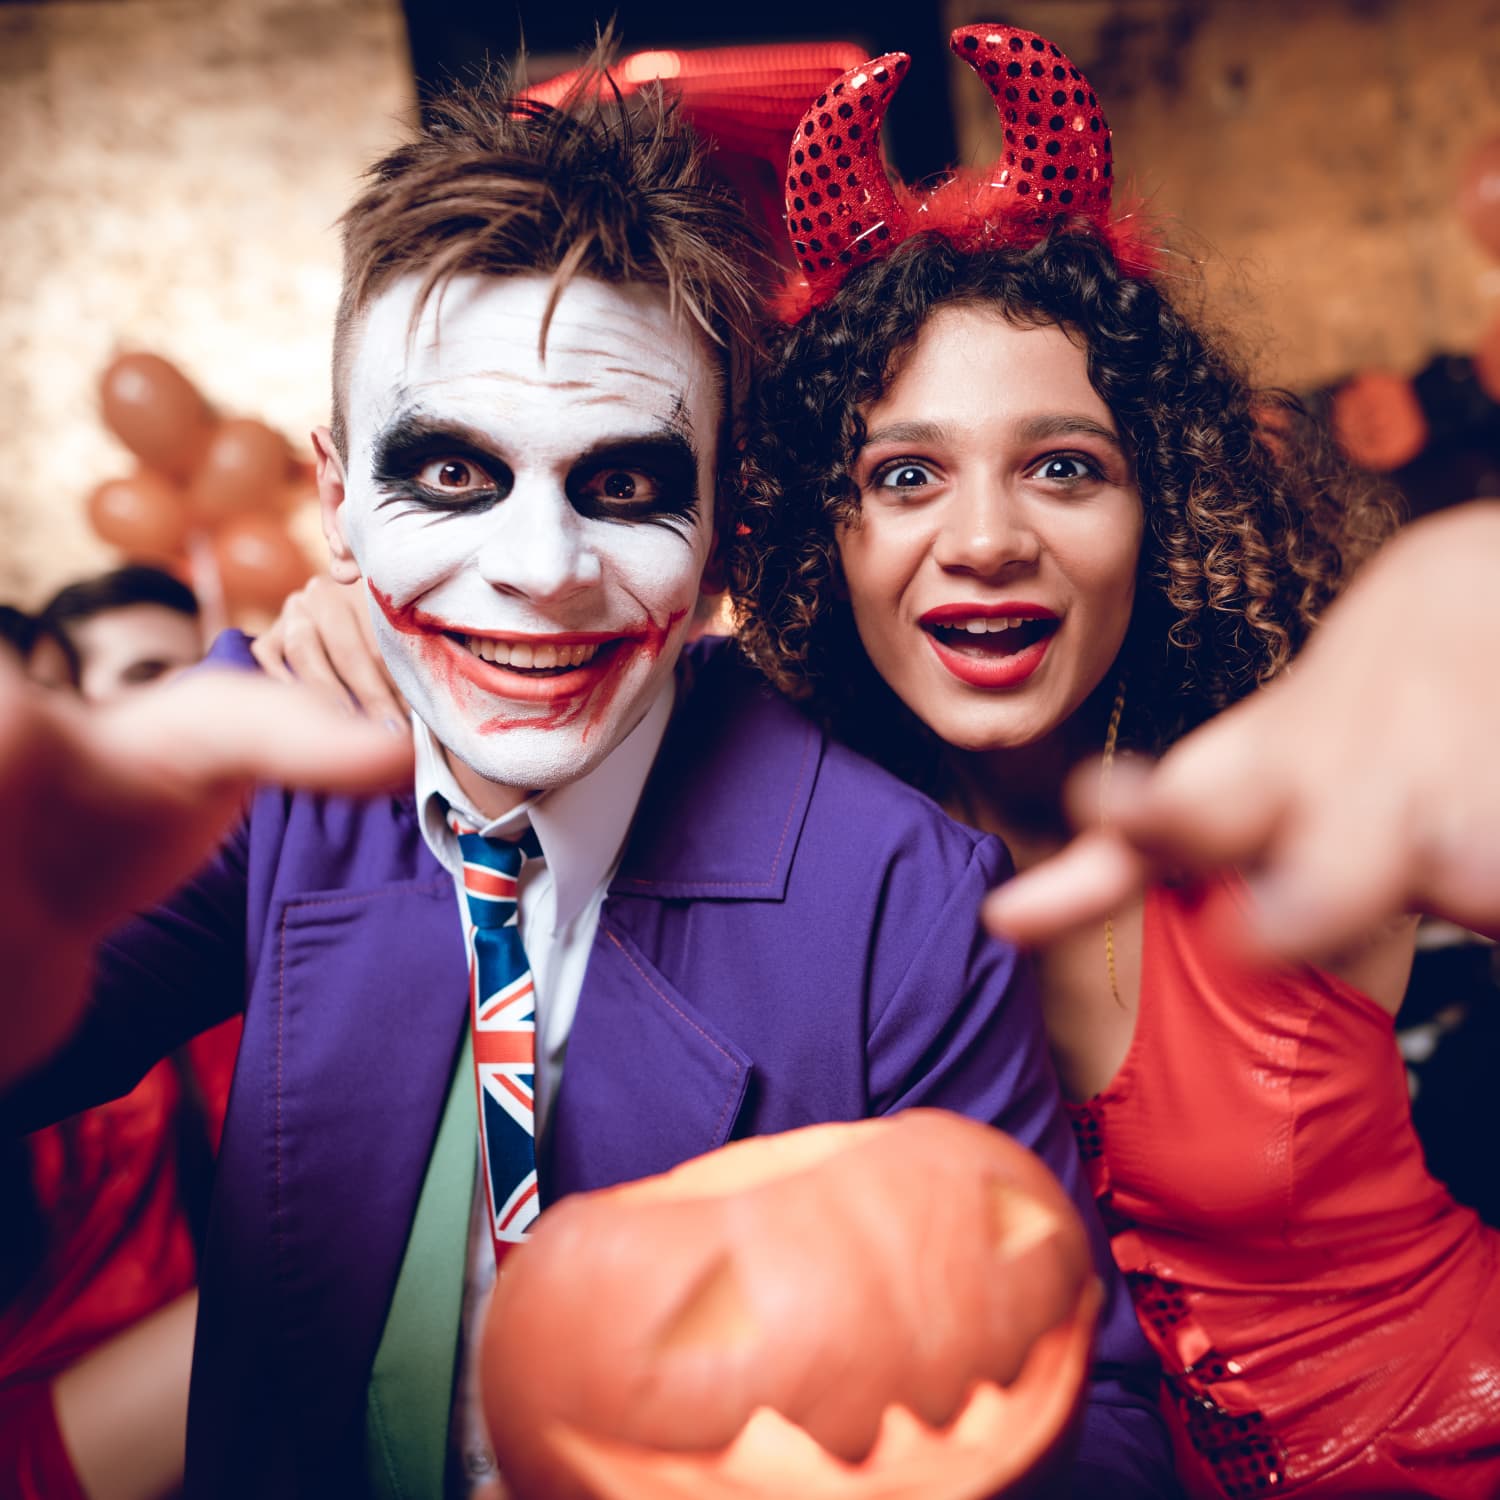 Spirit Halloween - What are you being for #Halloween this year